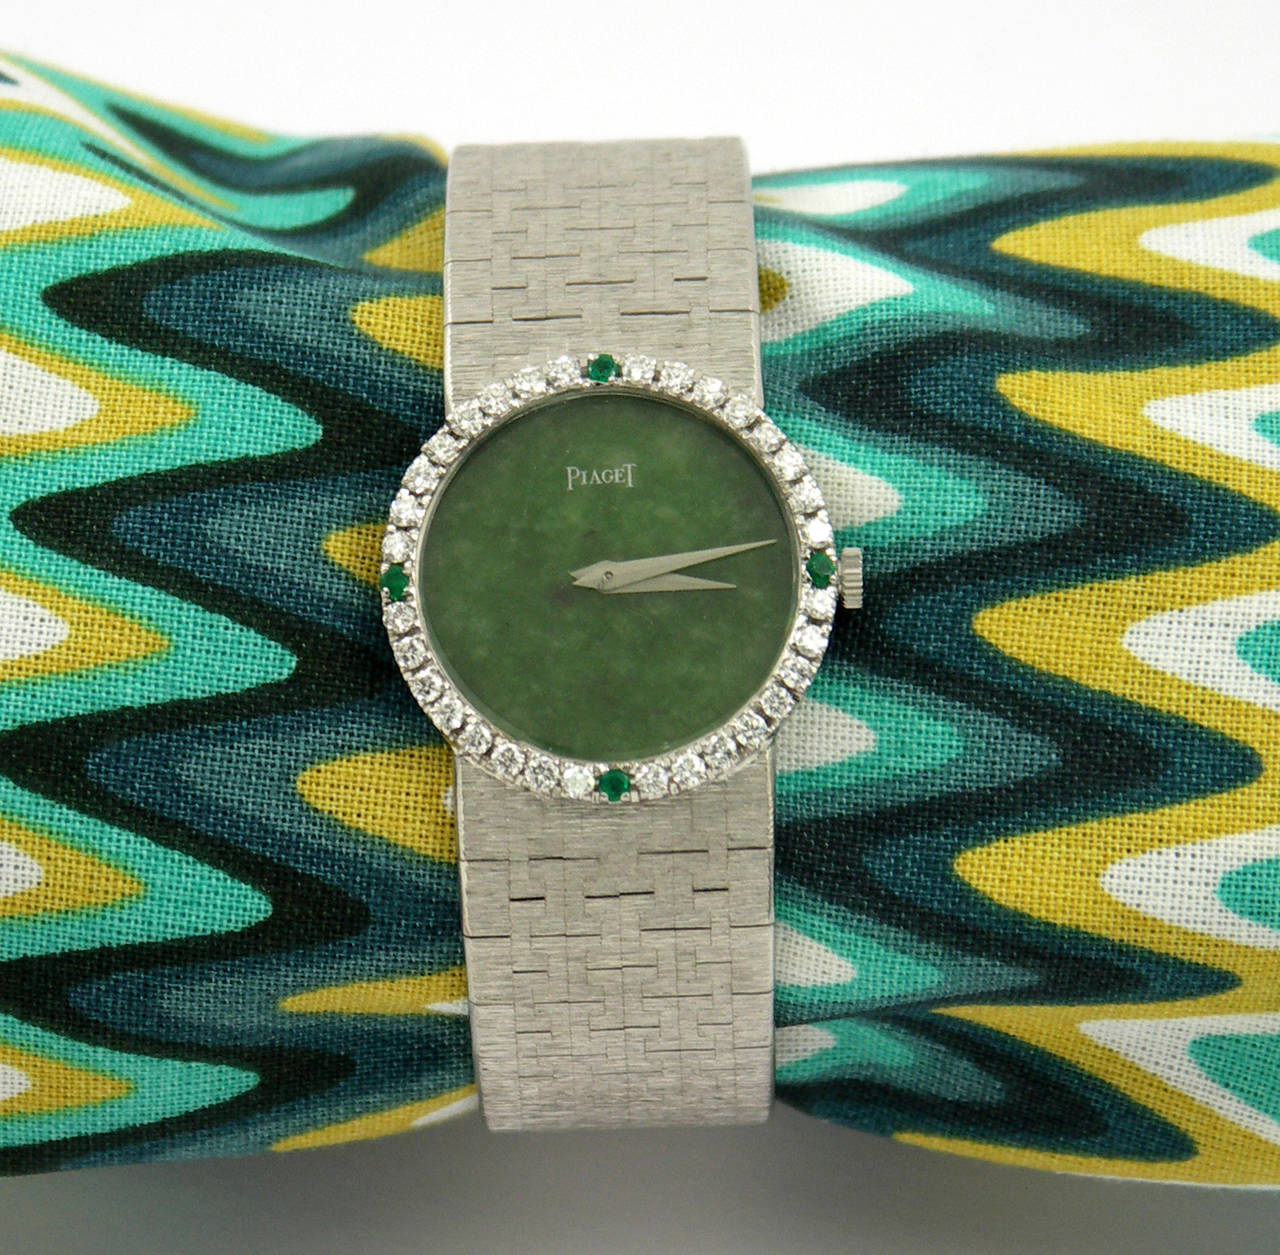 This much sought after 18K white gold, round jade dial, Piaget, is set with a
diamond bezel with four brilliant emeralds in the 12:00, 3:00, 6:00 and 9:00
positions. Total approximate weight 1.00CT. Overall length is 6 1/4 inches. Watch head